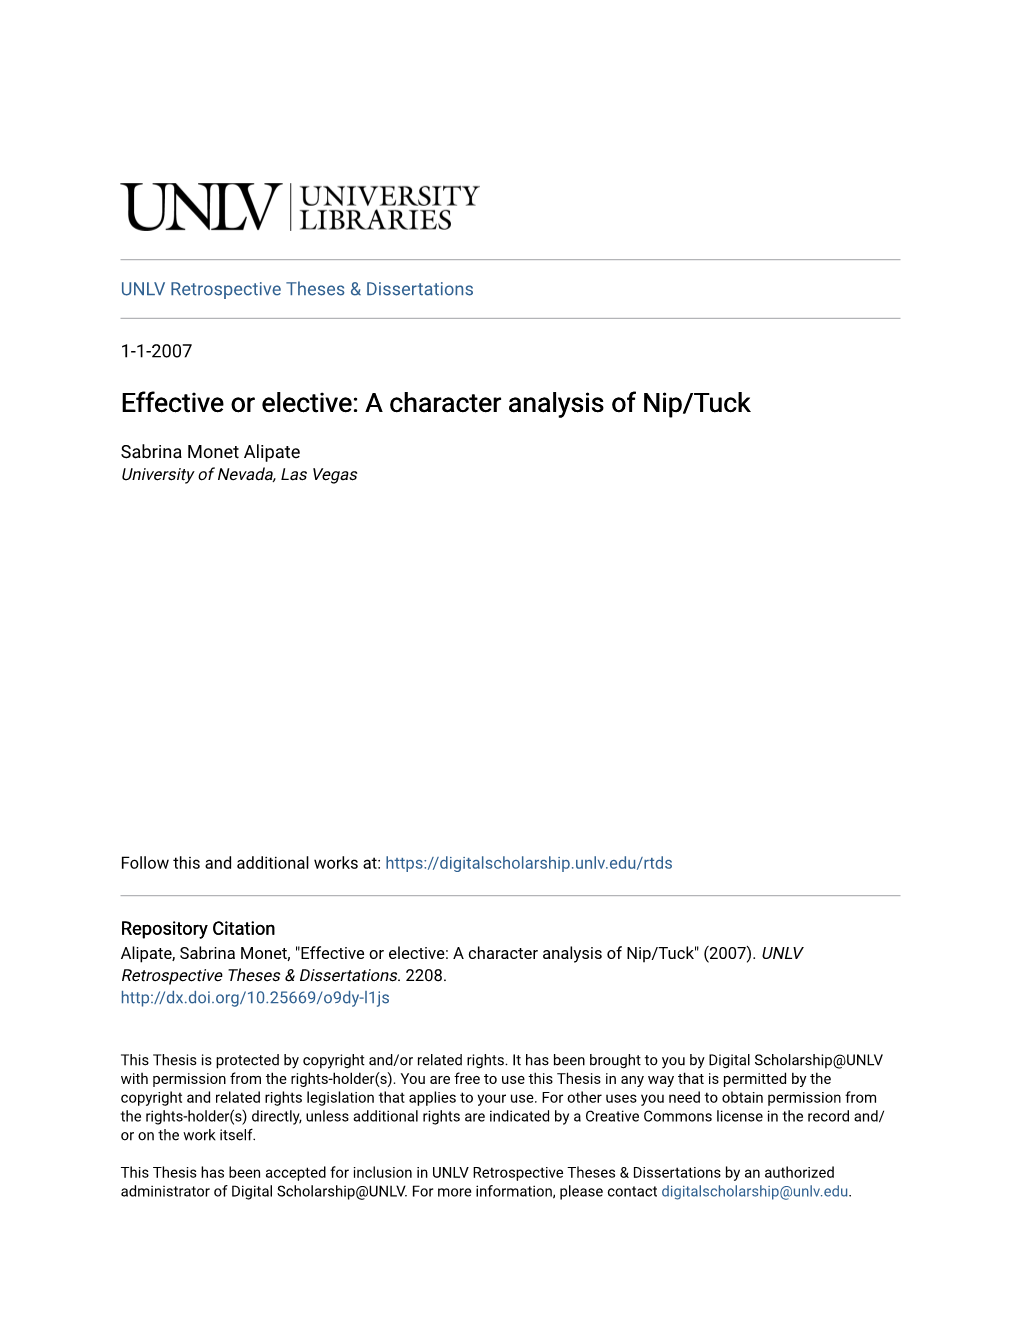 Effective Or Elective: a Character Analysis of Nip/Tuck